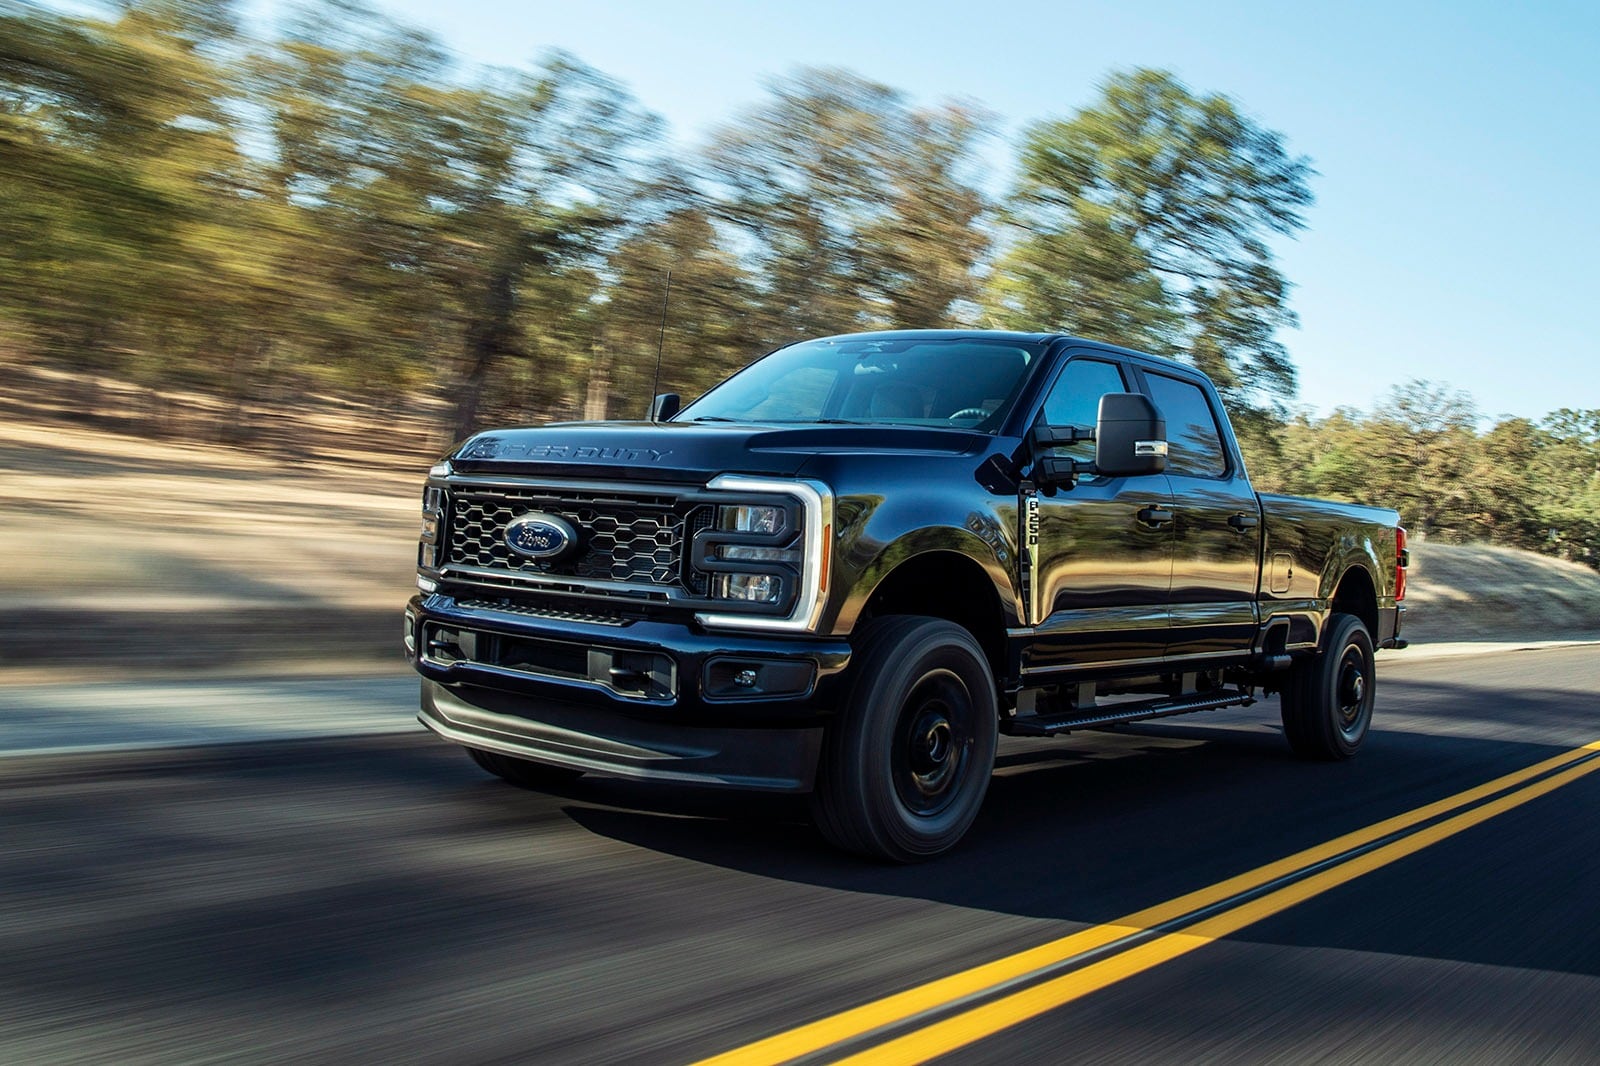 The New 2023 Ford F-250 Super Duty Looks Ready to Work | Edmunds